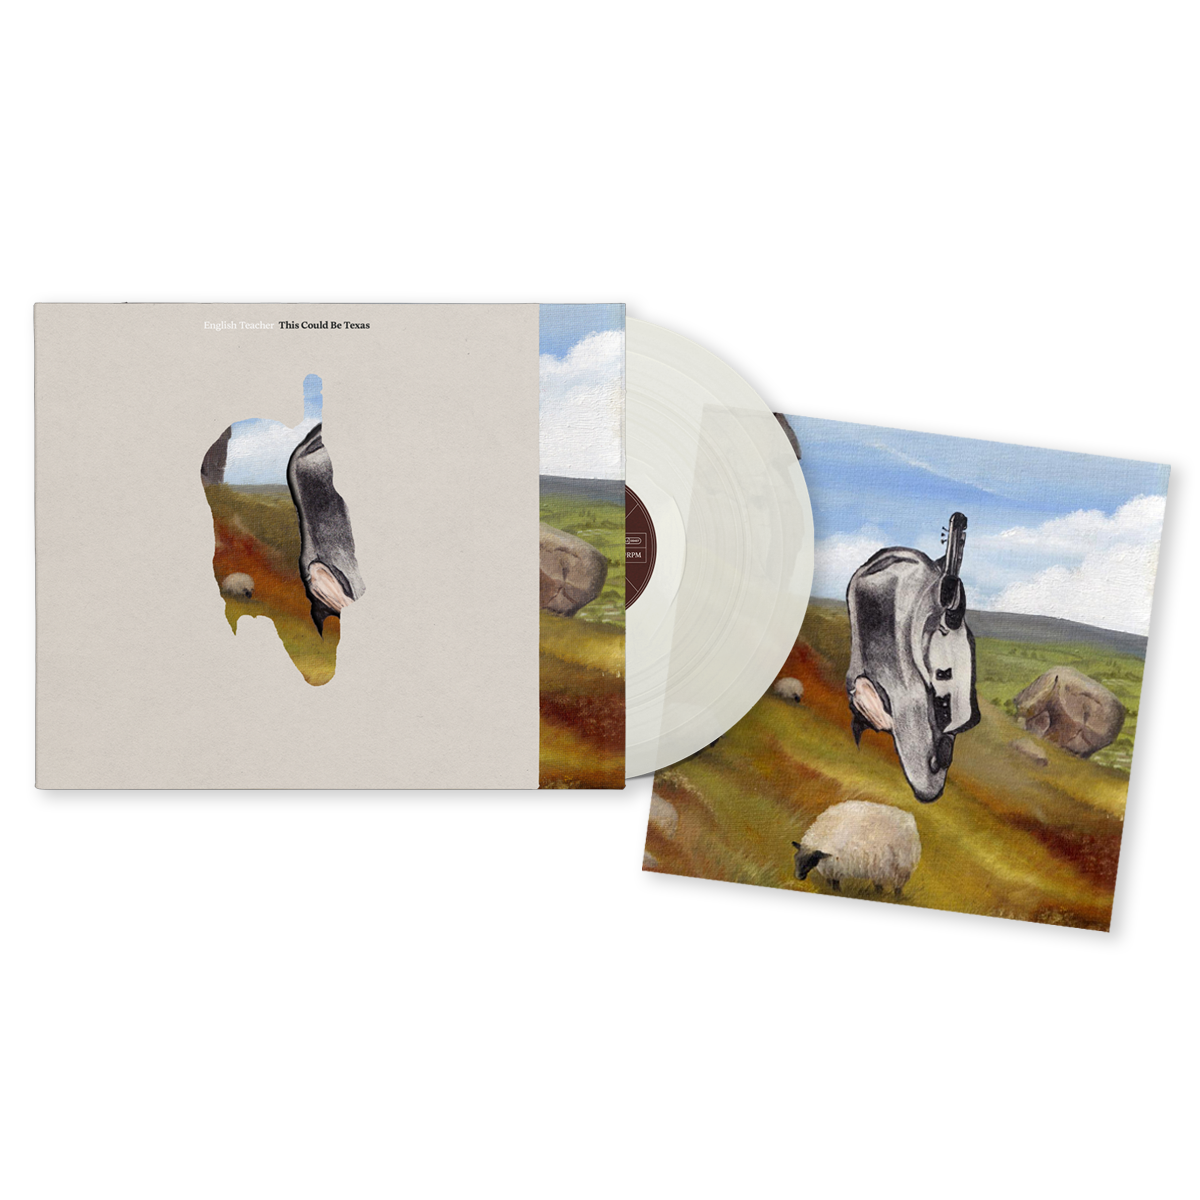 This Could be Texas: Limited Milky White Vinyl LP + Signed Art Card